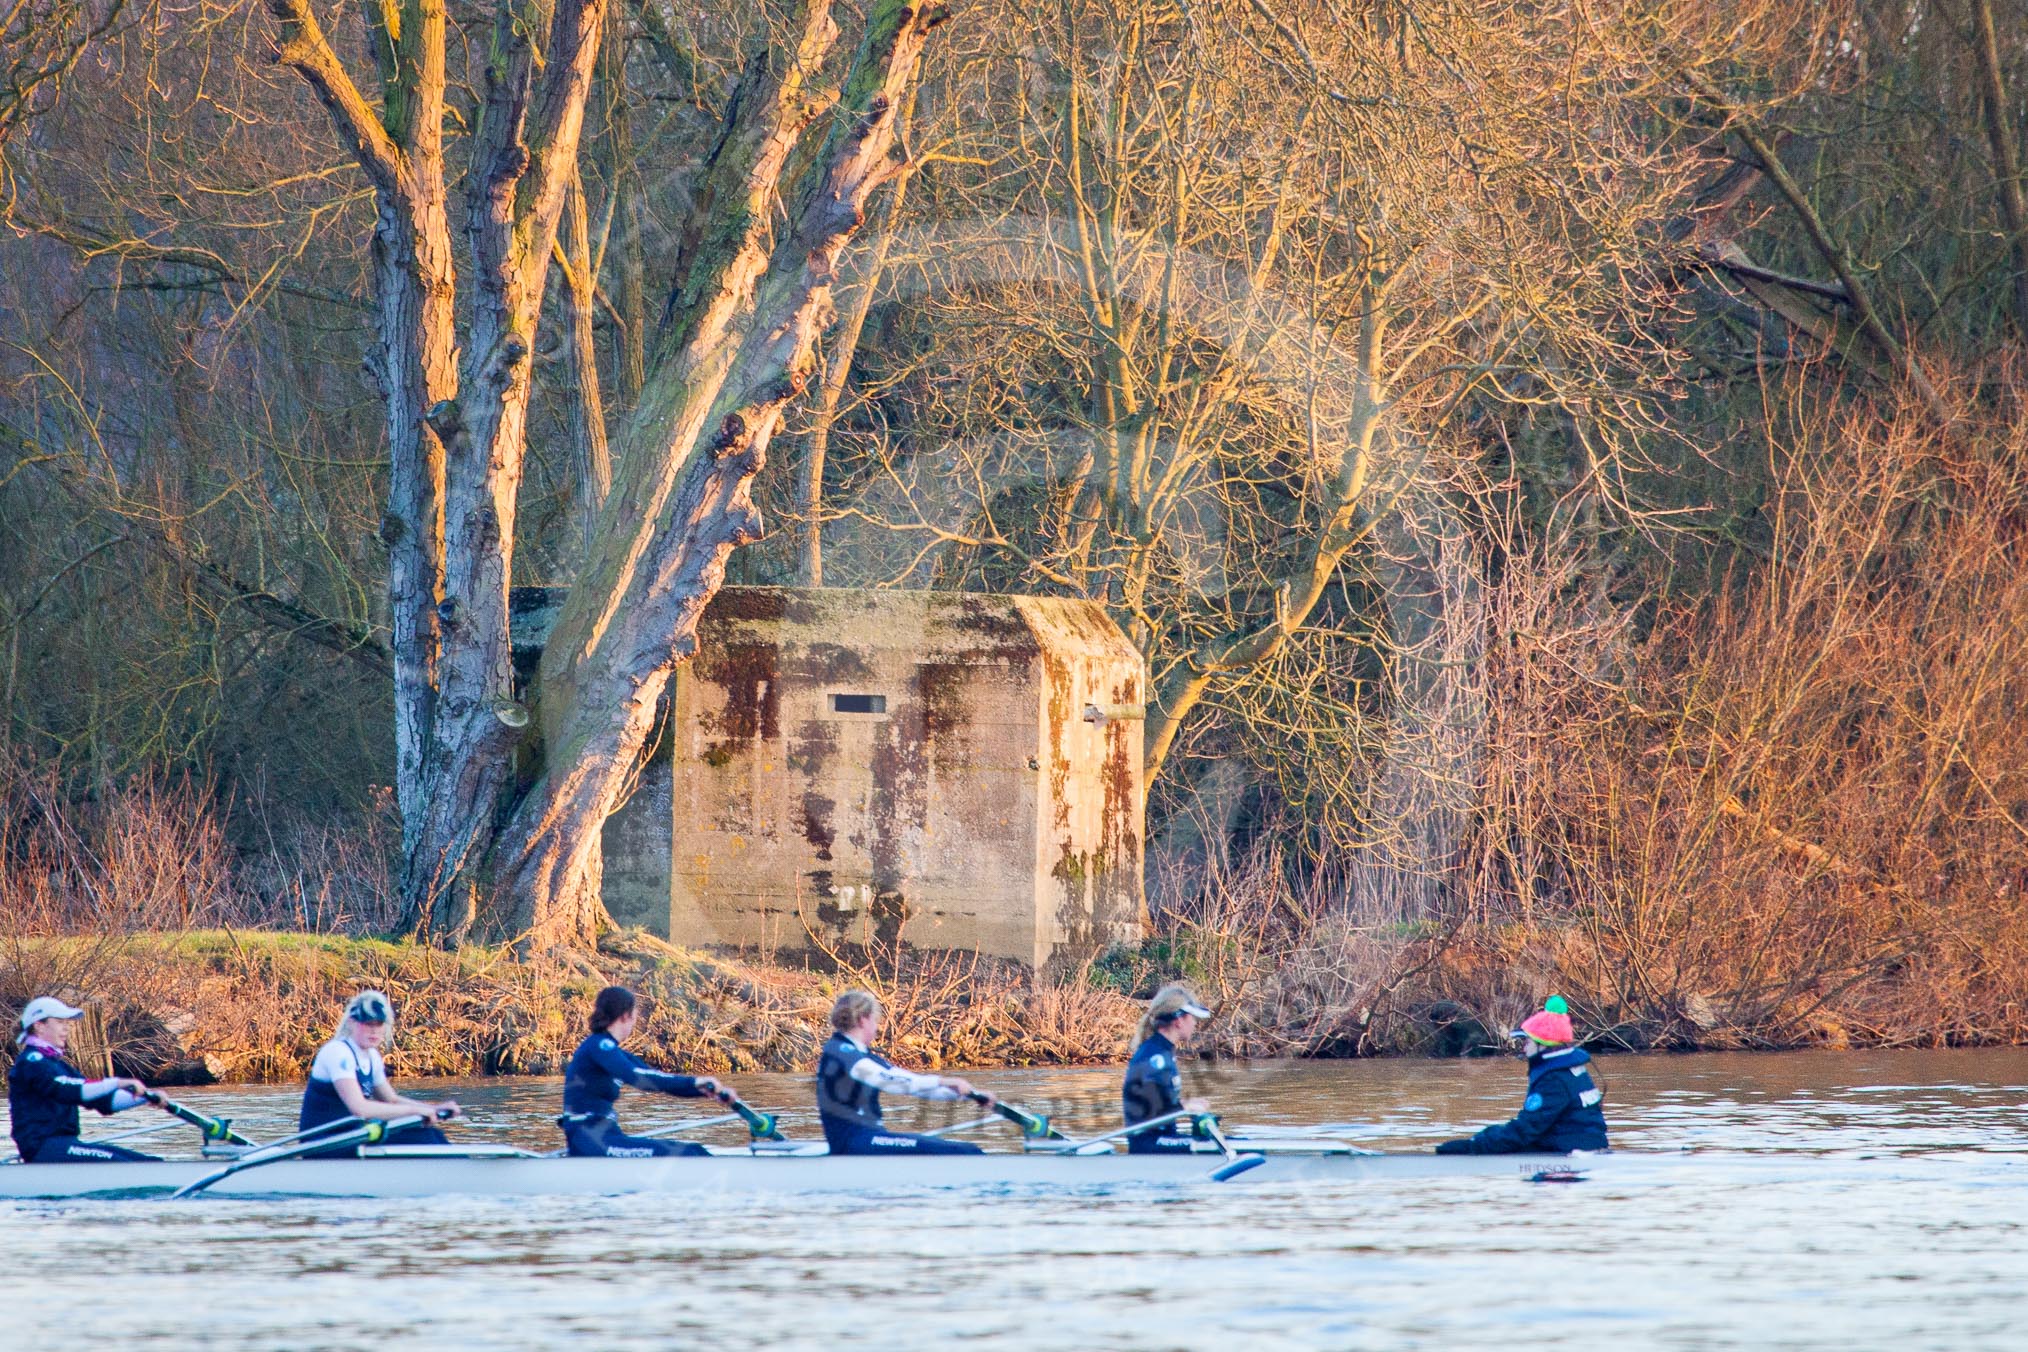 The Boat Race season 2013 - OUWBC training: In the OUWBC Blue Boat 4 seat Jo Lee, Amy Varney, Harriet Keane, Anastasia Chitty, stroke Maxie Scheske, and cox Katie Apfelbaum. In the background a WWII bunker..
River Thames,
Wallingford,
Oxfordshire,
United Kingdom,
on 13 March 2013 at 17:36, image #173